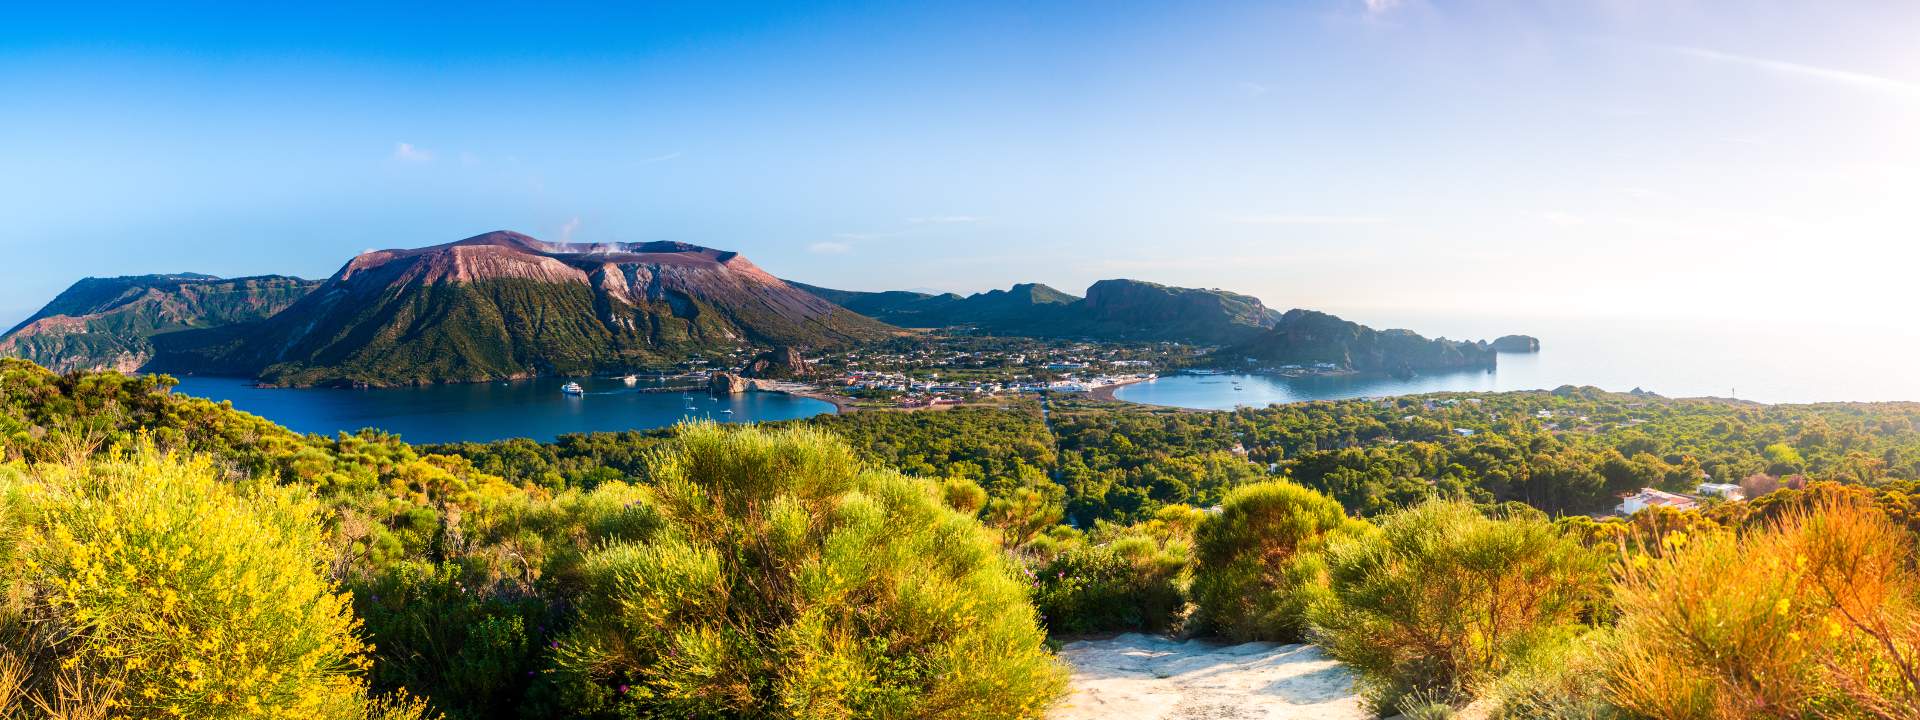 Between winds & volcanoes discover the charm of the Aeolian Islands